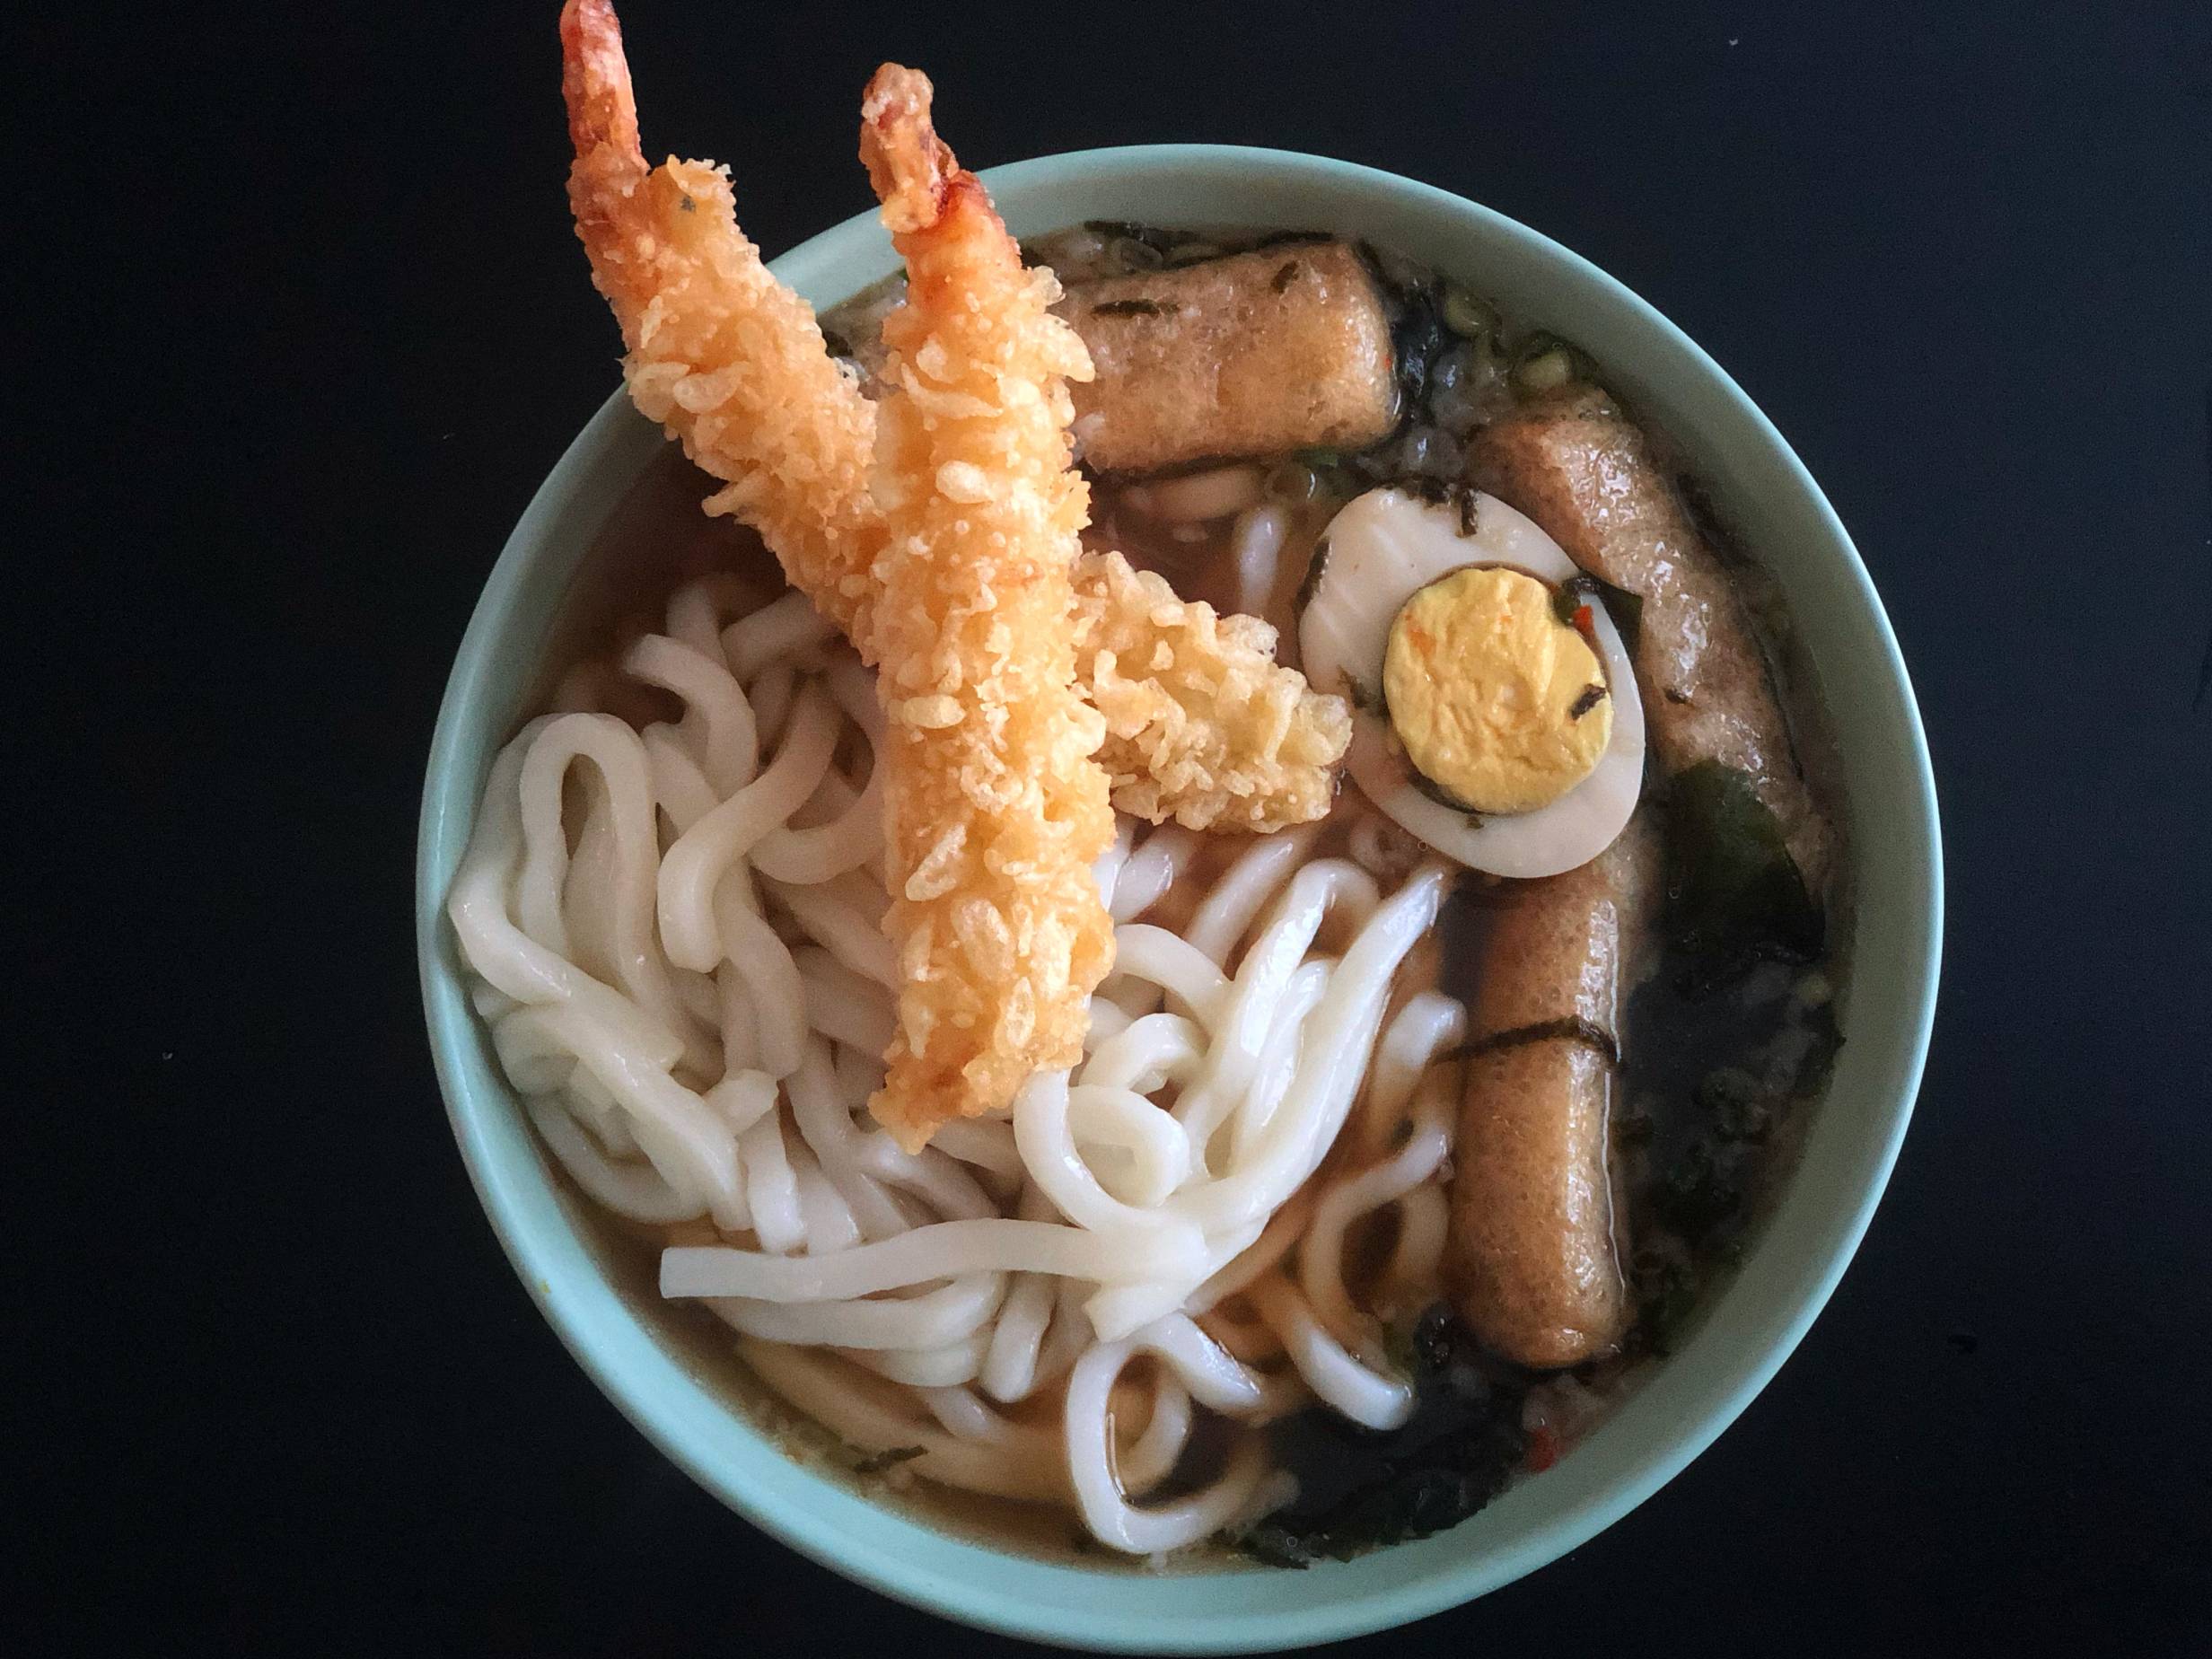 Two pieces of shrimp tempura rest on the side of the bowl and in the ramen. There are many udon noodles, some garnishes and a dark broth in a mint bowl on a black table. Photo by Alyssa Buckley.